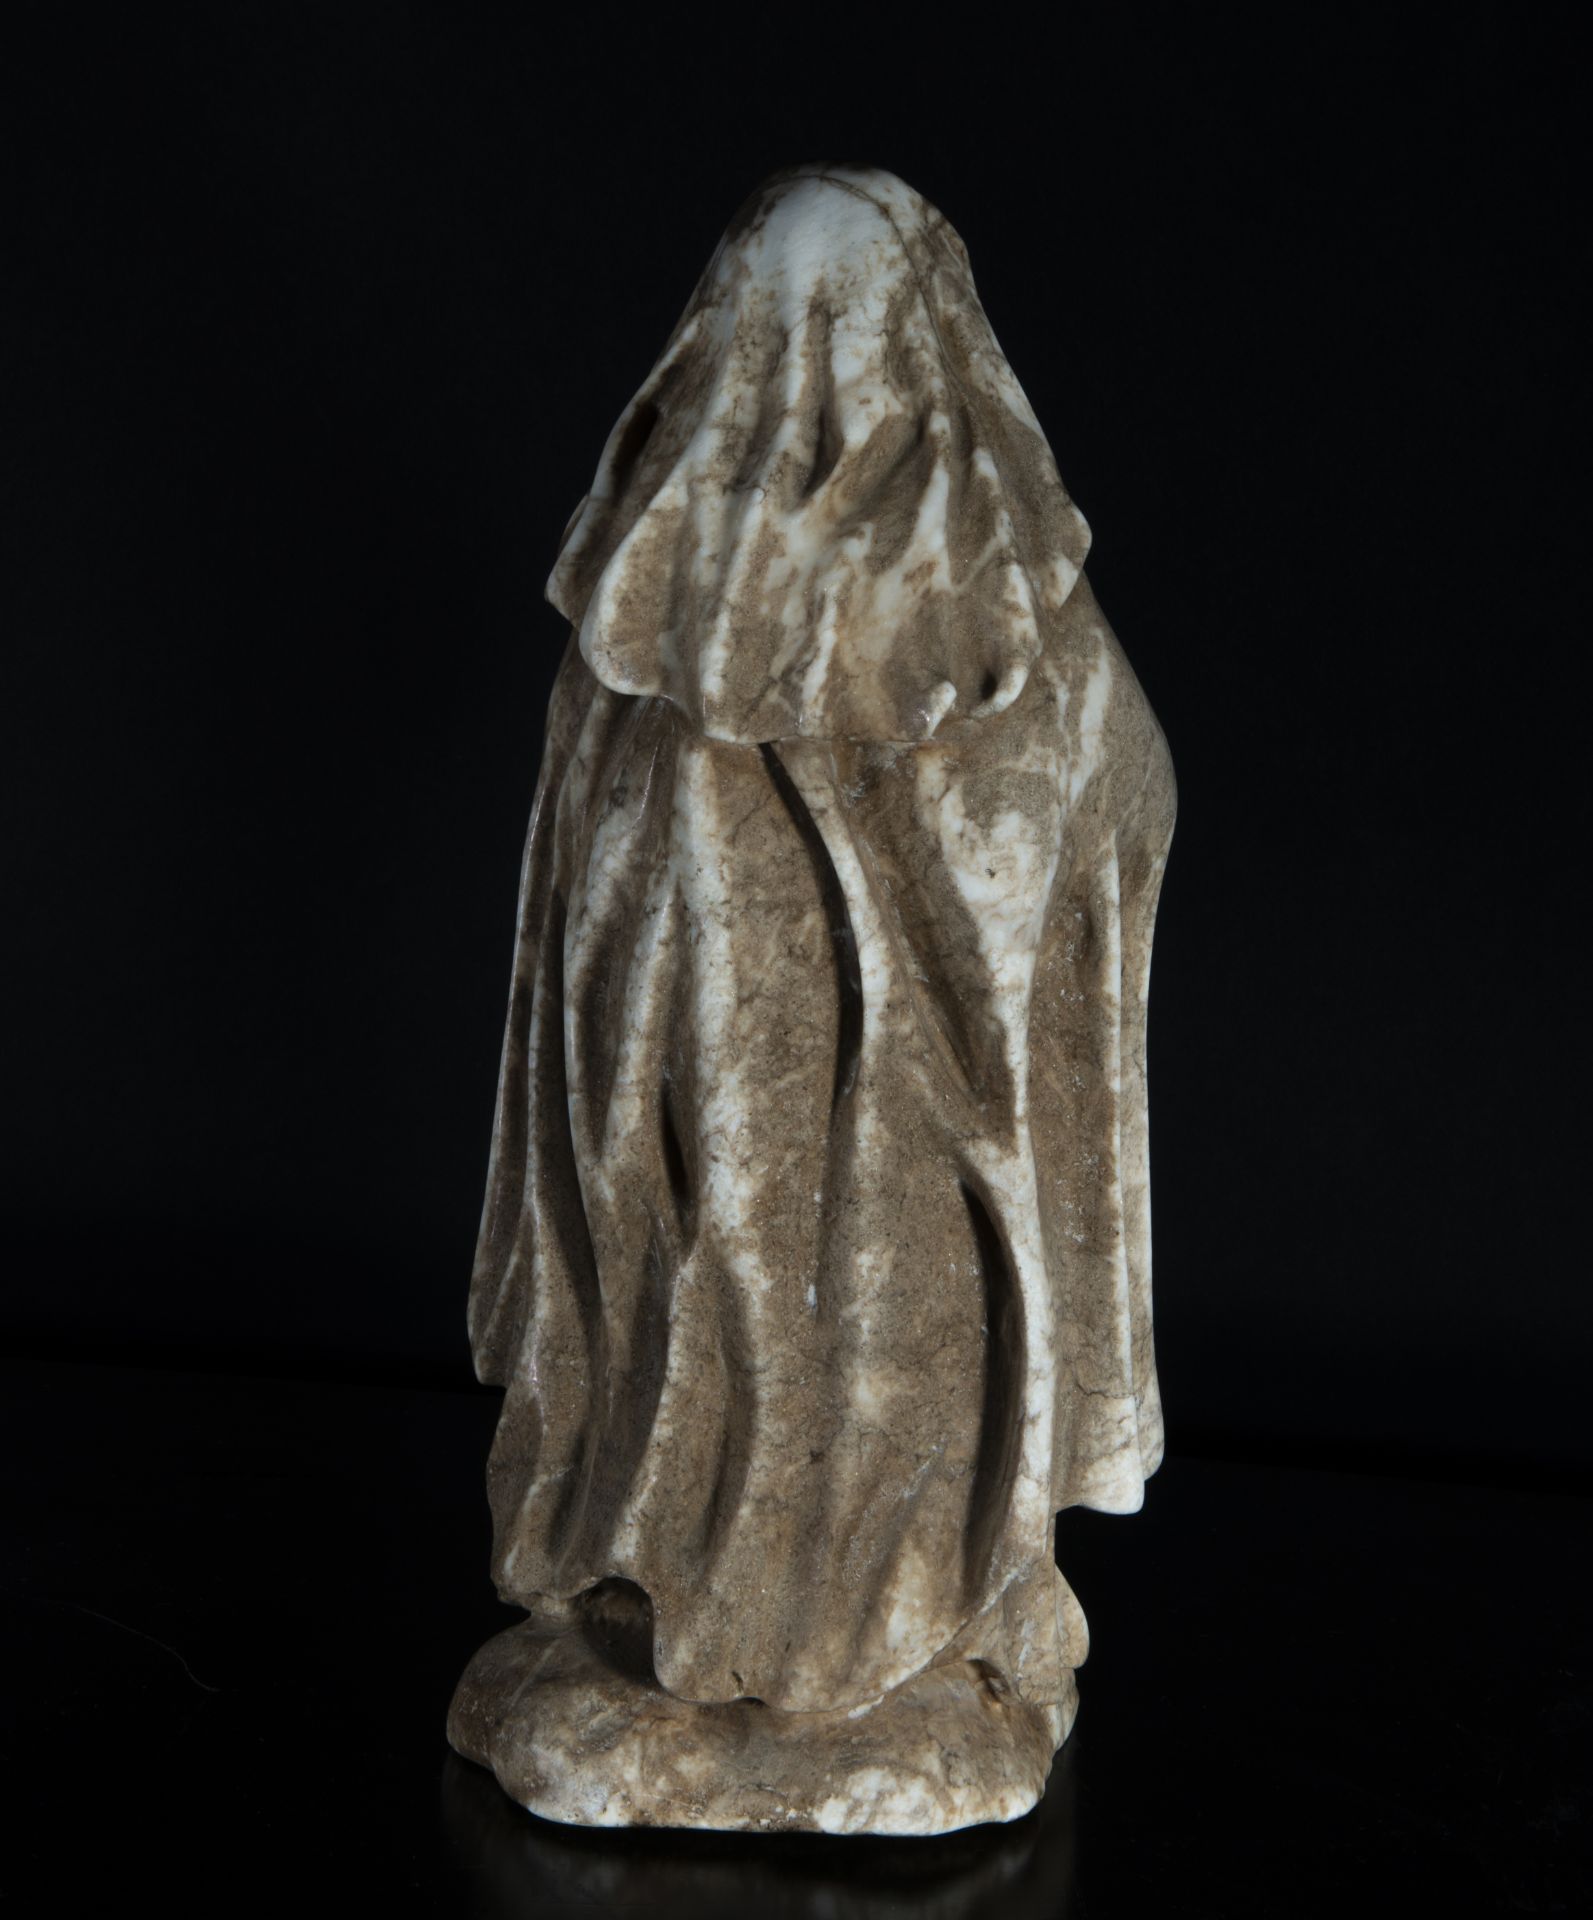 Portuguese Virgin in Alabaster carving, possibly 17th century, Portuguese work - Image 3 of 4